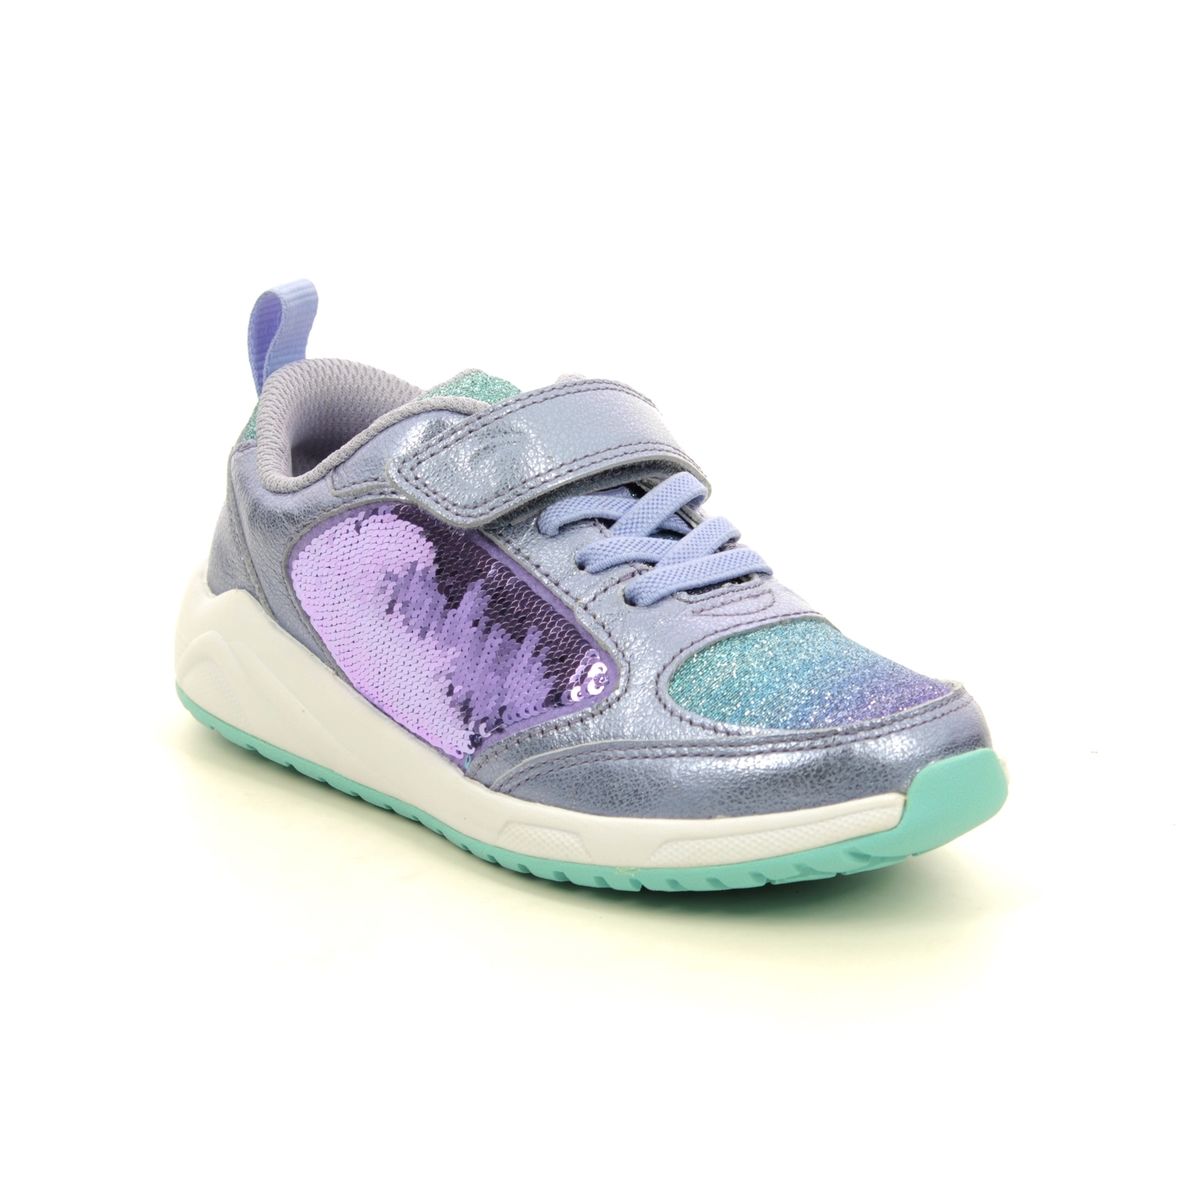 Clarks Aeon Flex K Lilac Kids Girls Trainers 541146F In Size 10 In Plain Lilac F Width Fitting Regular Fit For kids